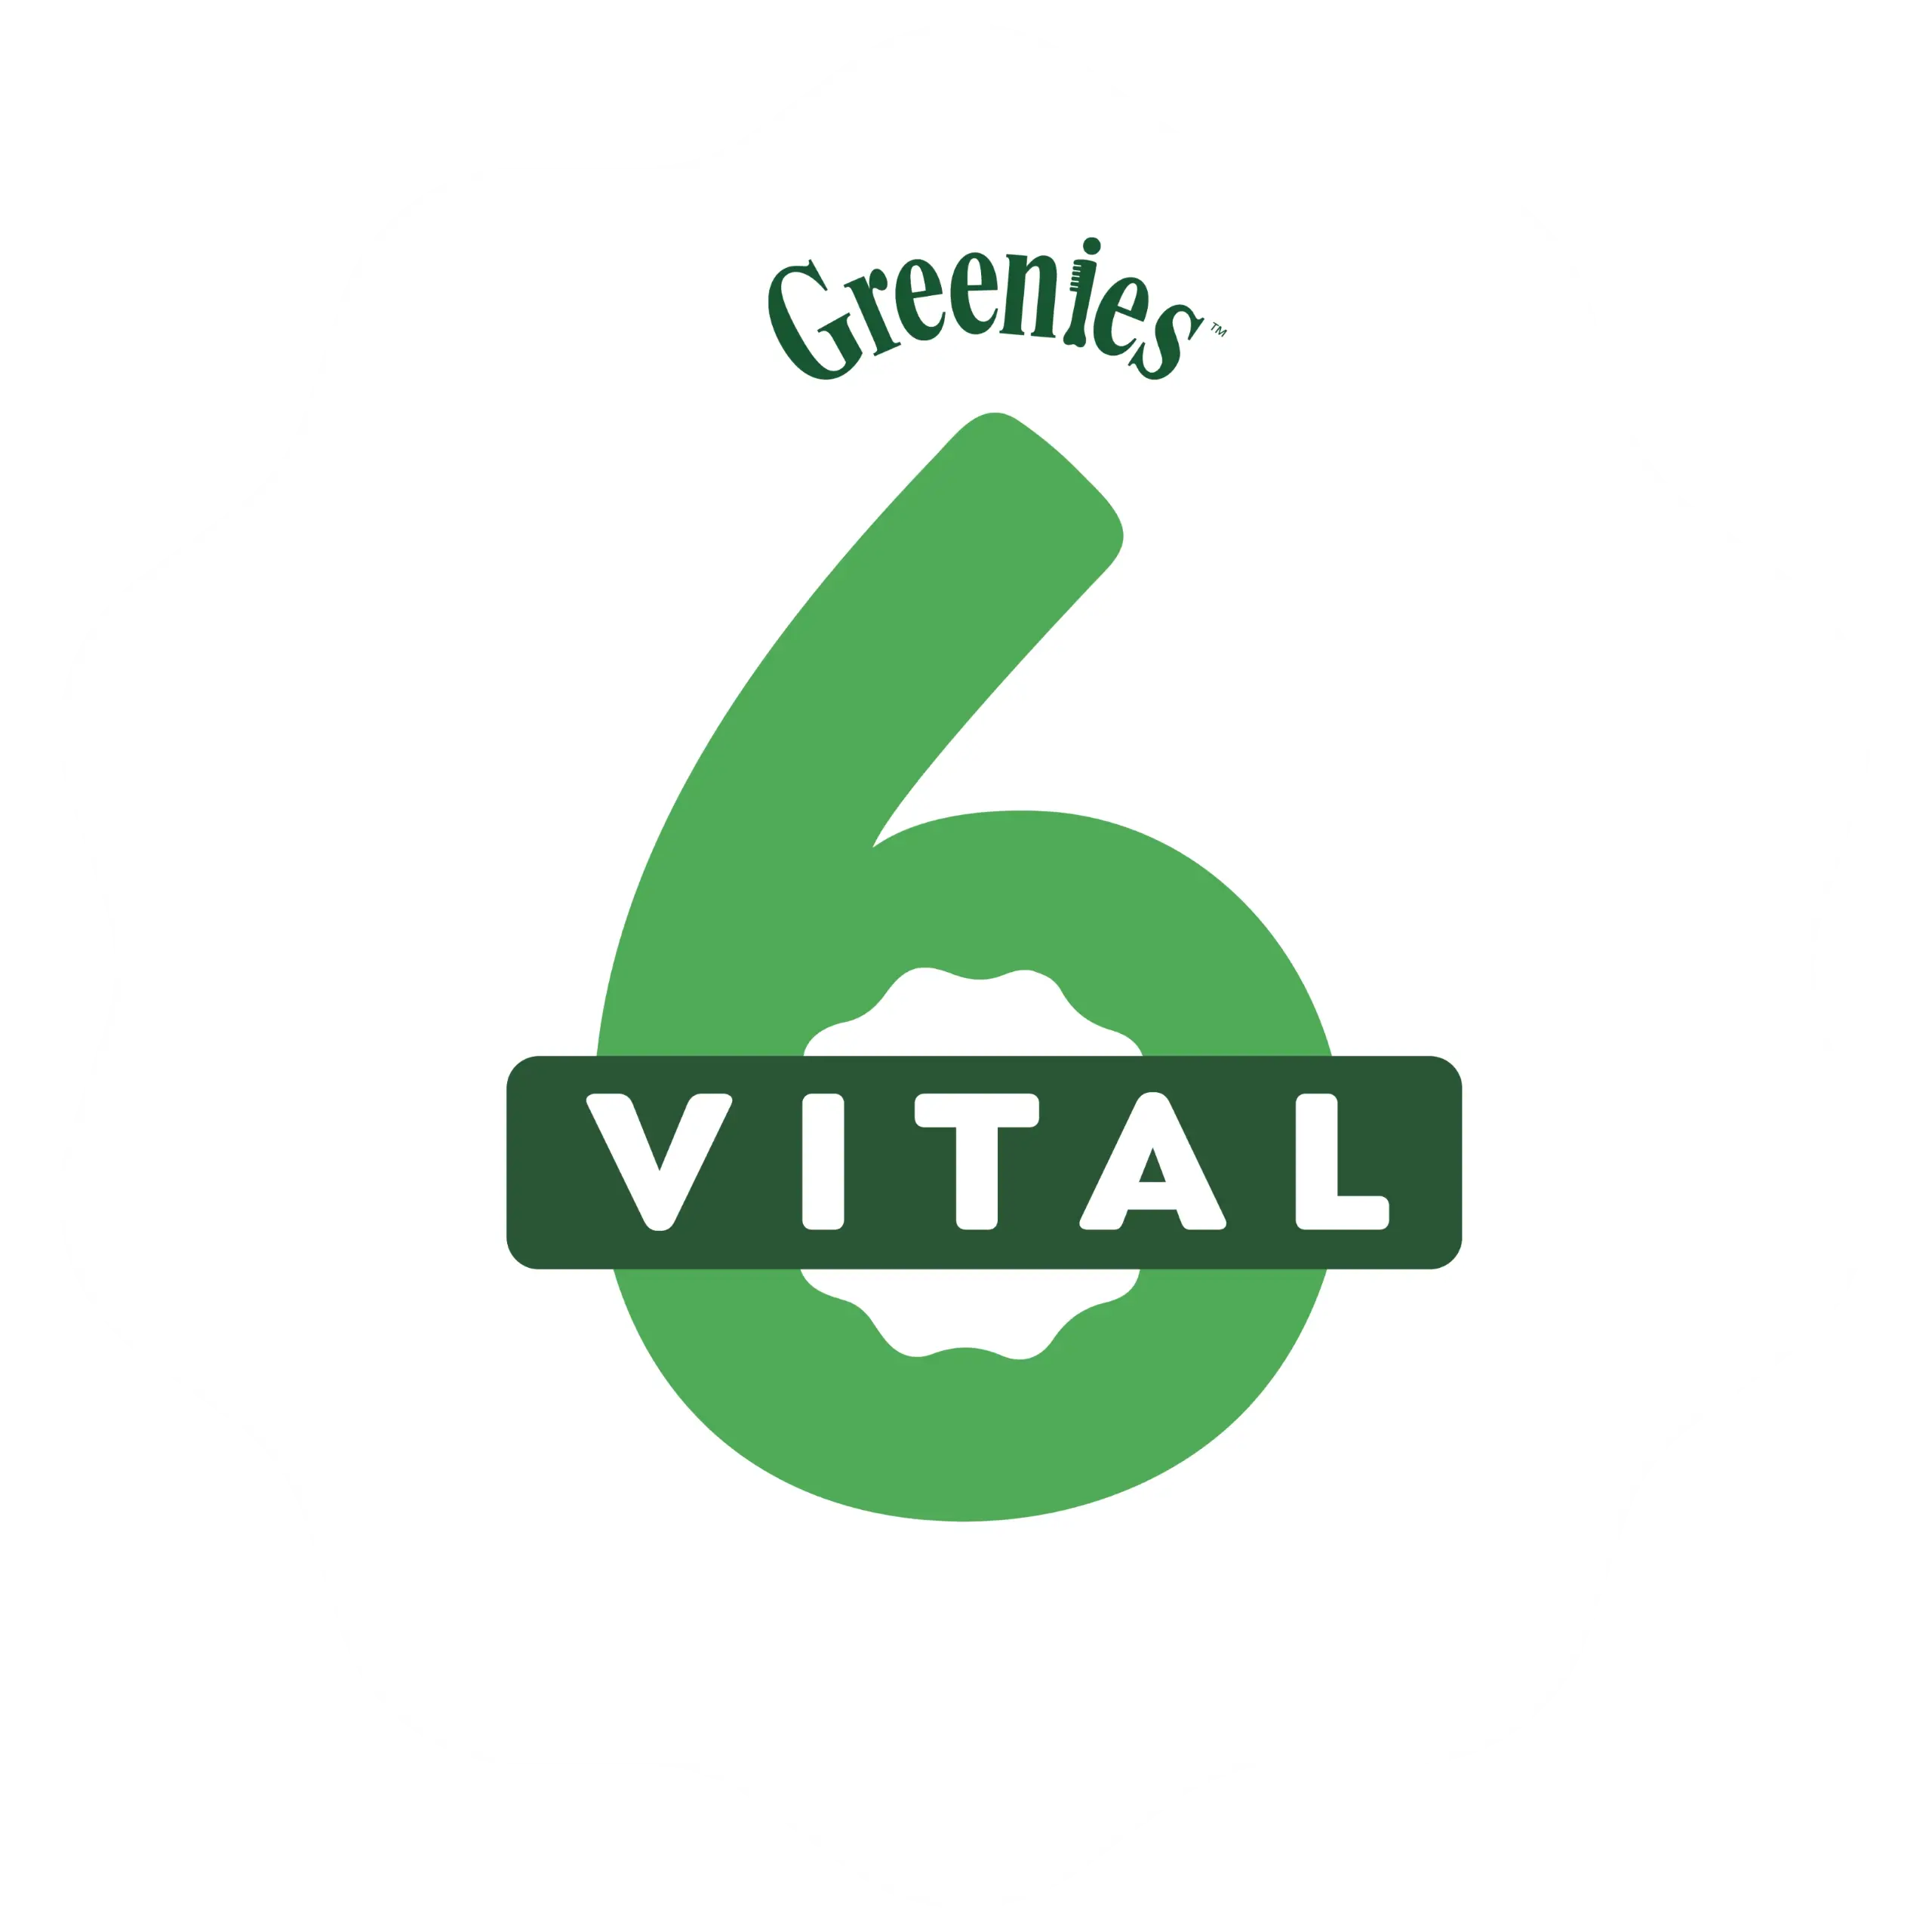 Logo of greenies featuring the number 6 in green with the word 